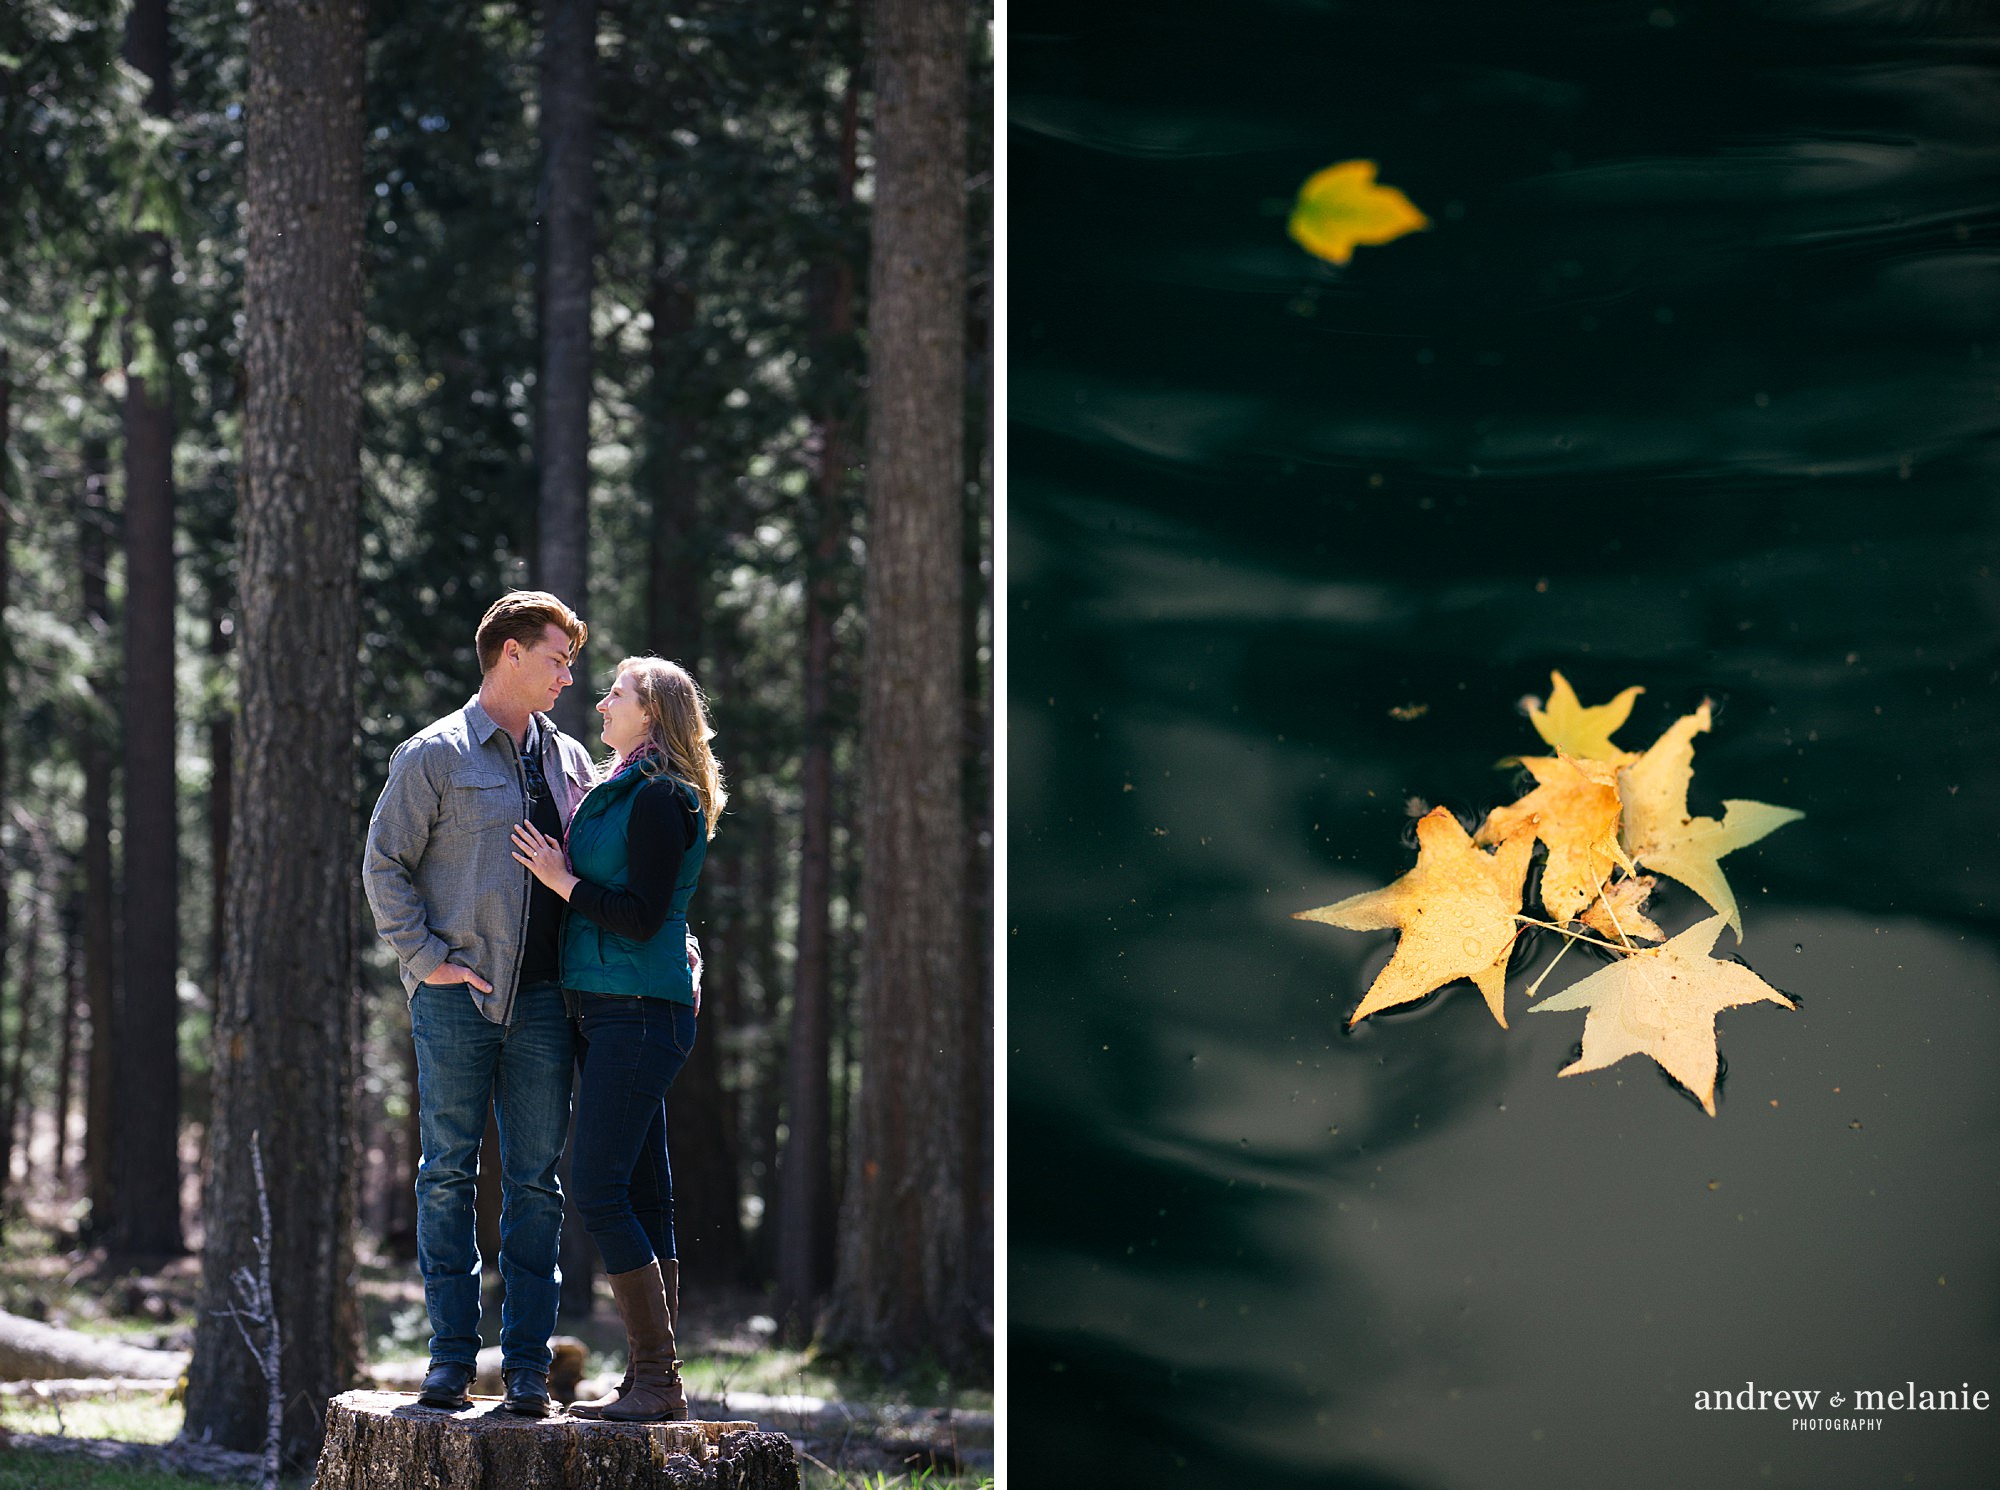 Andrew and Melanie Photography engagement session highlights